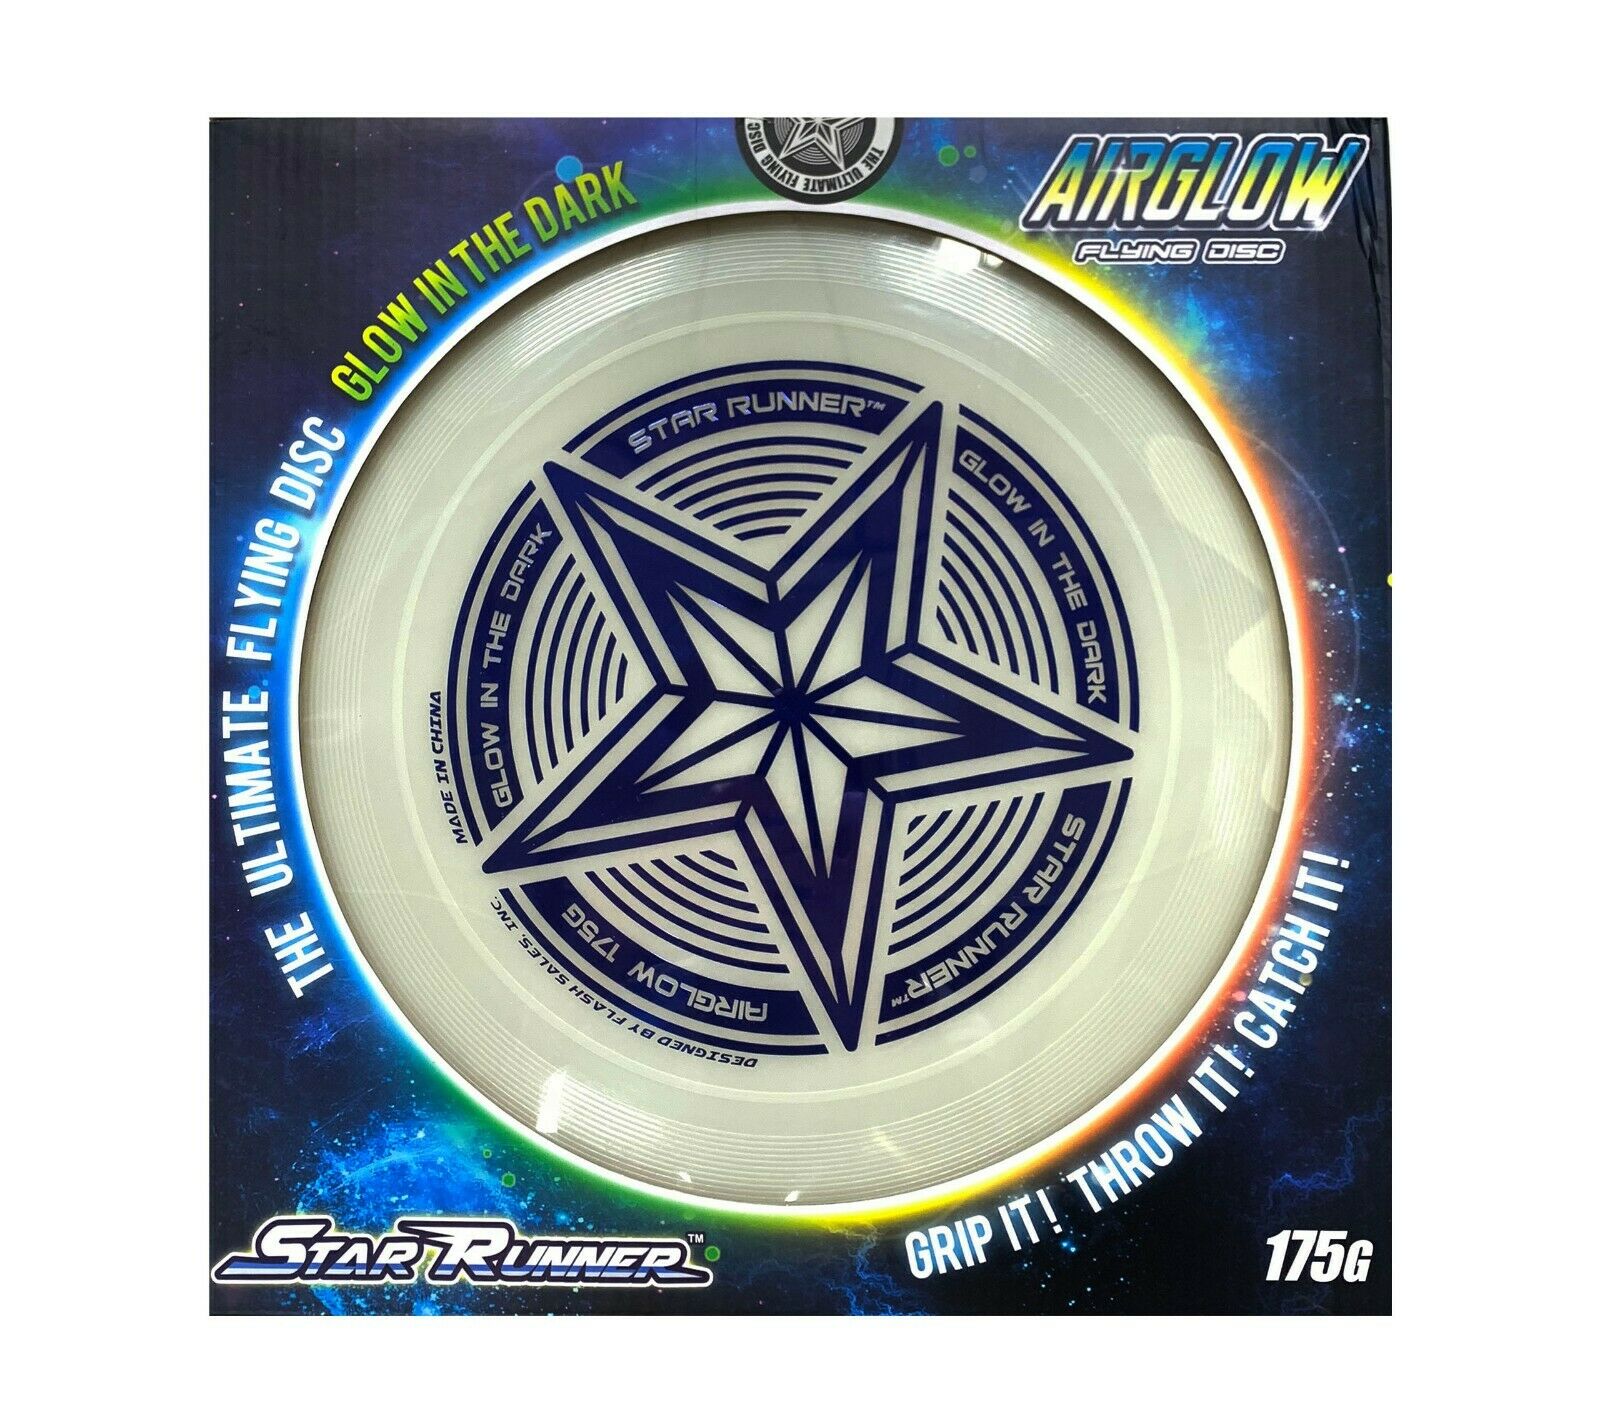 175g Glowing Flying Disc By Slr Brands:  Glow In The Dark Toy For Kids, Frisbee